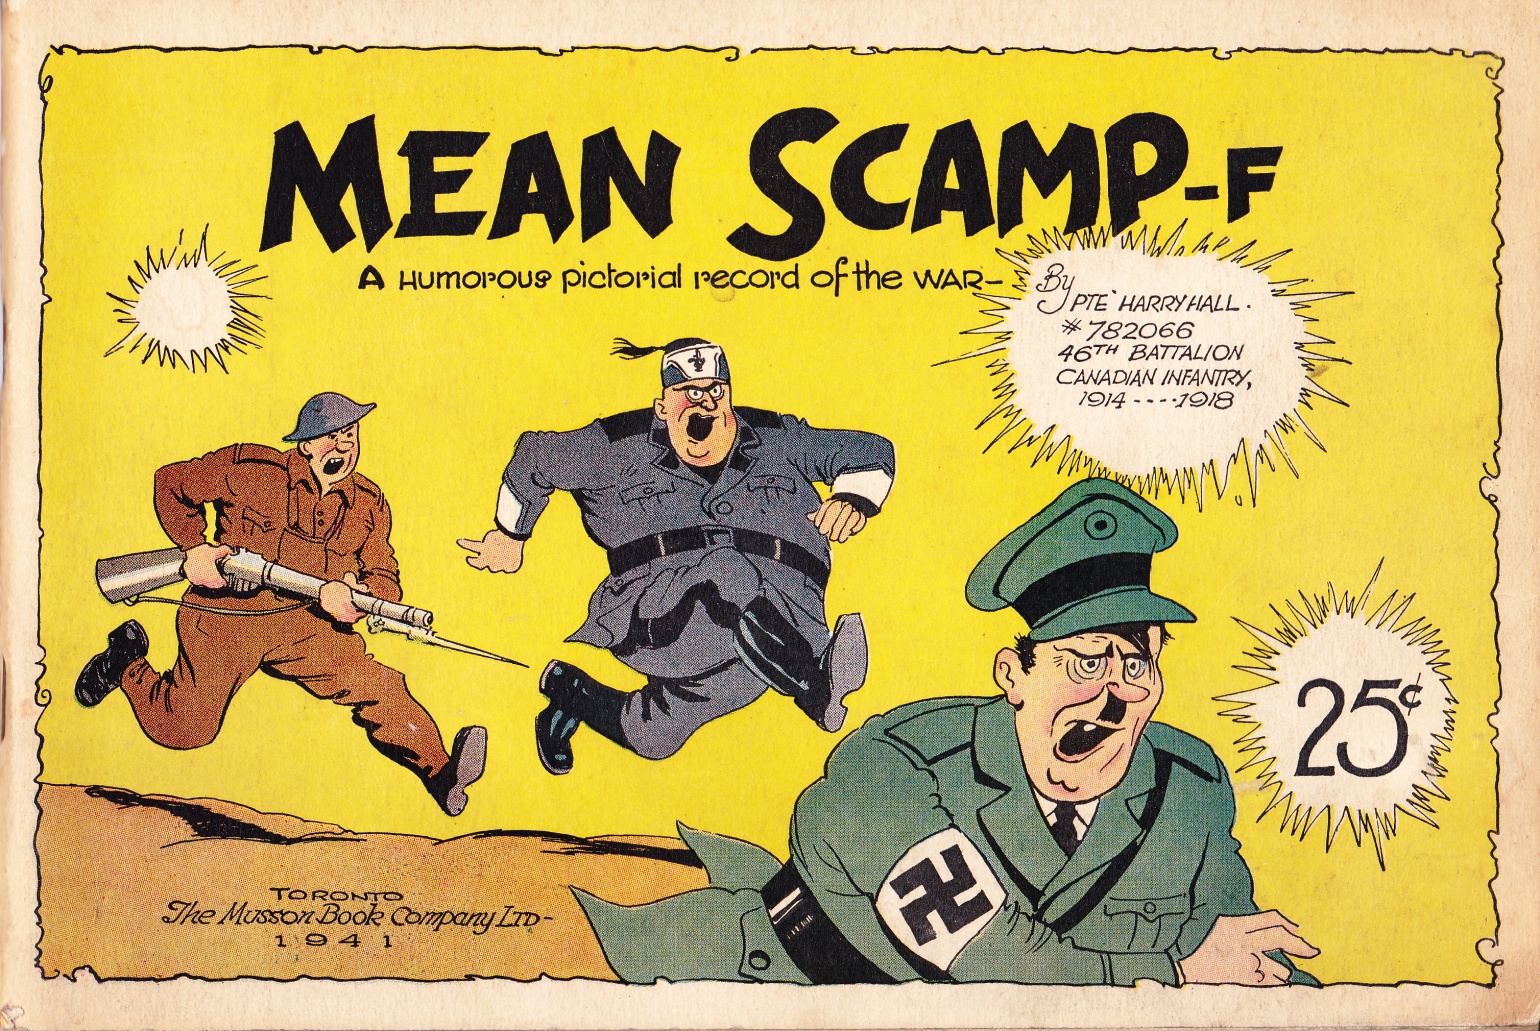 C:\Users\Robert\Documents\CARTOONING ILLUSTRATION ANIMATION\IMAGE BY CARTOONIST\H\HALL HARRY S, Mean SCAMP-F, 1941, fc.jpg